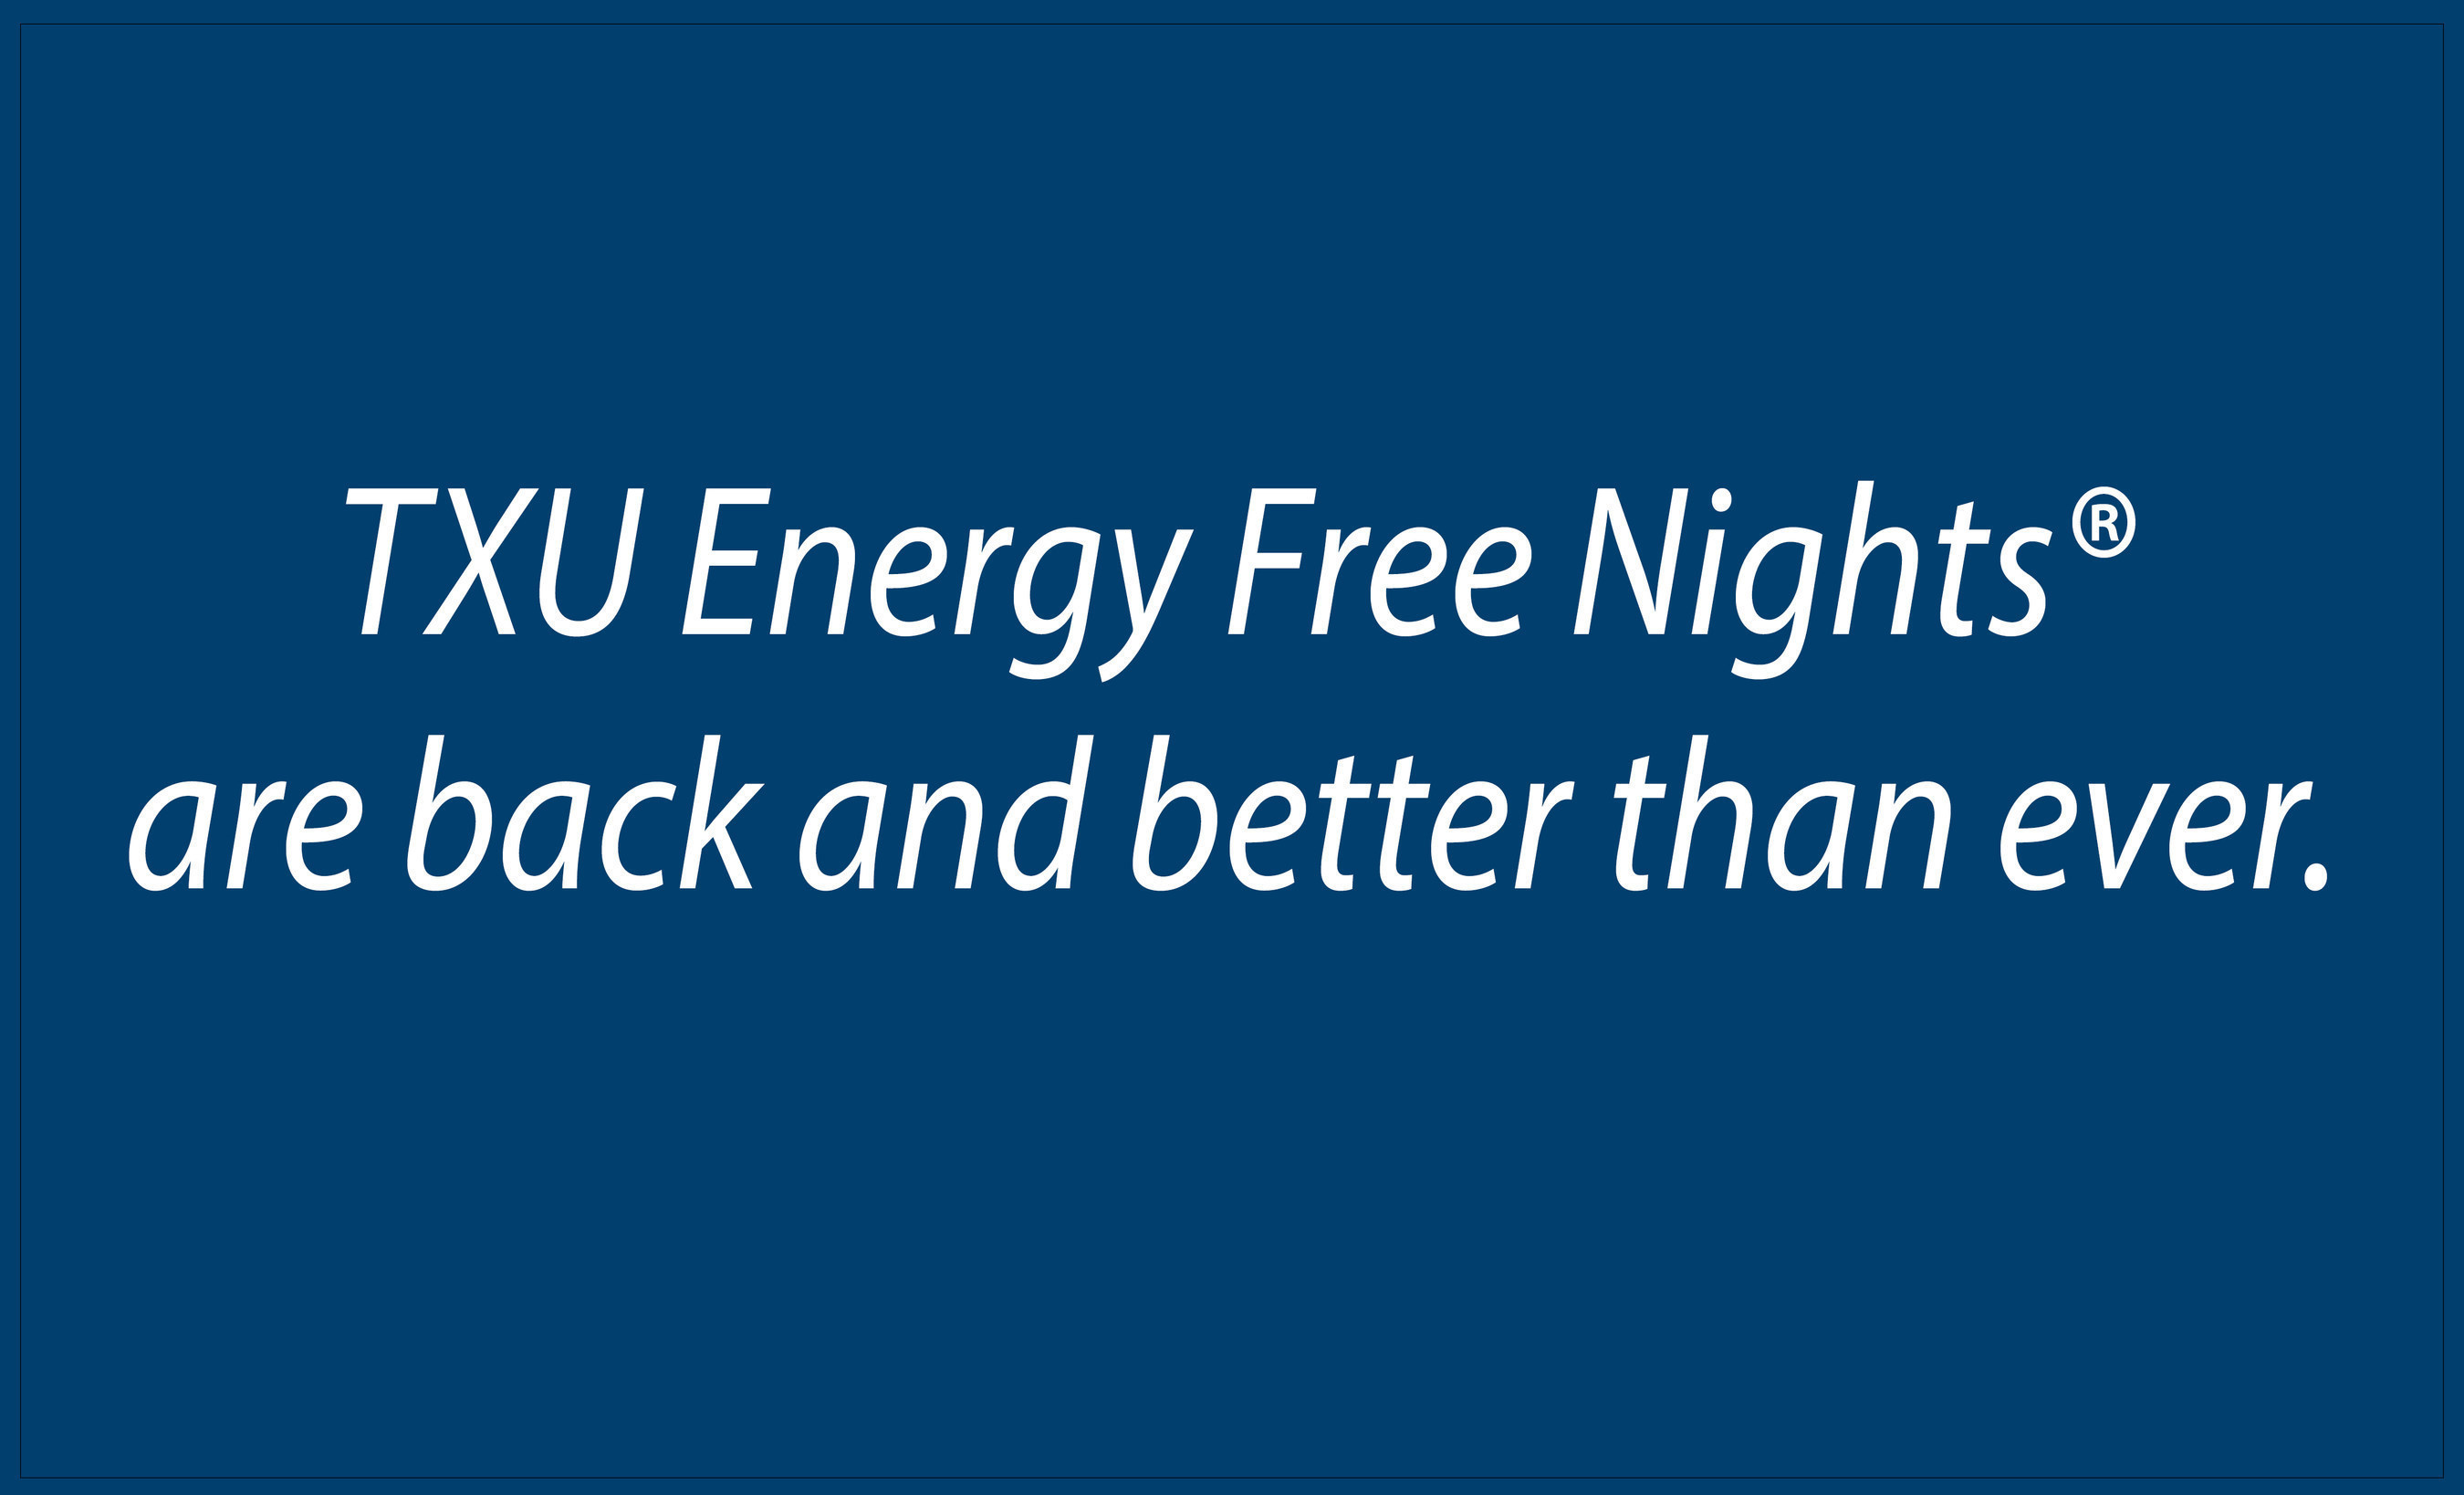 txu-energy-free-nights-evolving-to-give-consumers-even-more-choice